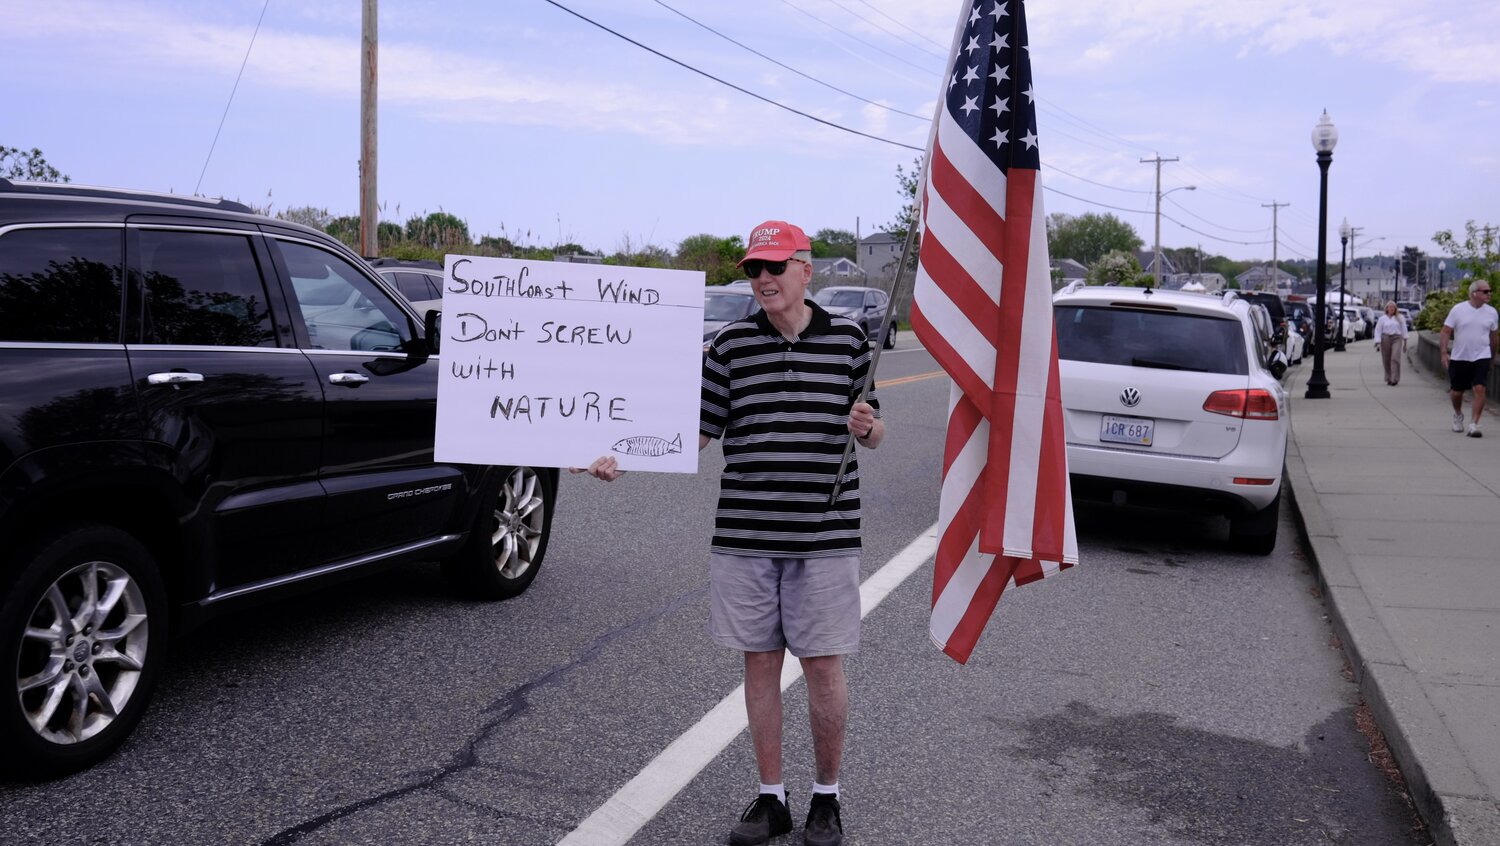 This Portsmouth man who declined to identify himself — “I don’t trust the press,” he said — waved at motorists in front of the rally site while donning a “Trump: Take America Back 2024” hat and flashing a sign that read “SouthCoast Wind: Don’t Screw with Nature” on one side and “God, Guns & Country – TRUMP 2024” on the other. He called President Biden “a nut” for his green energy initiatives.